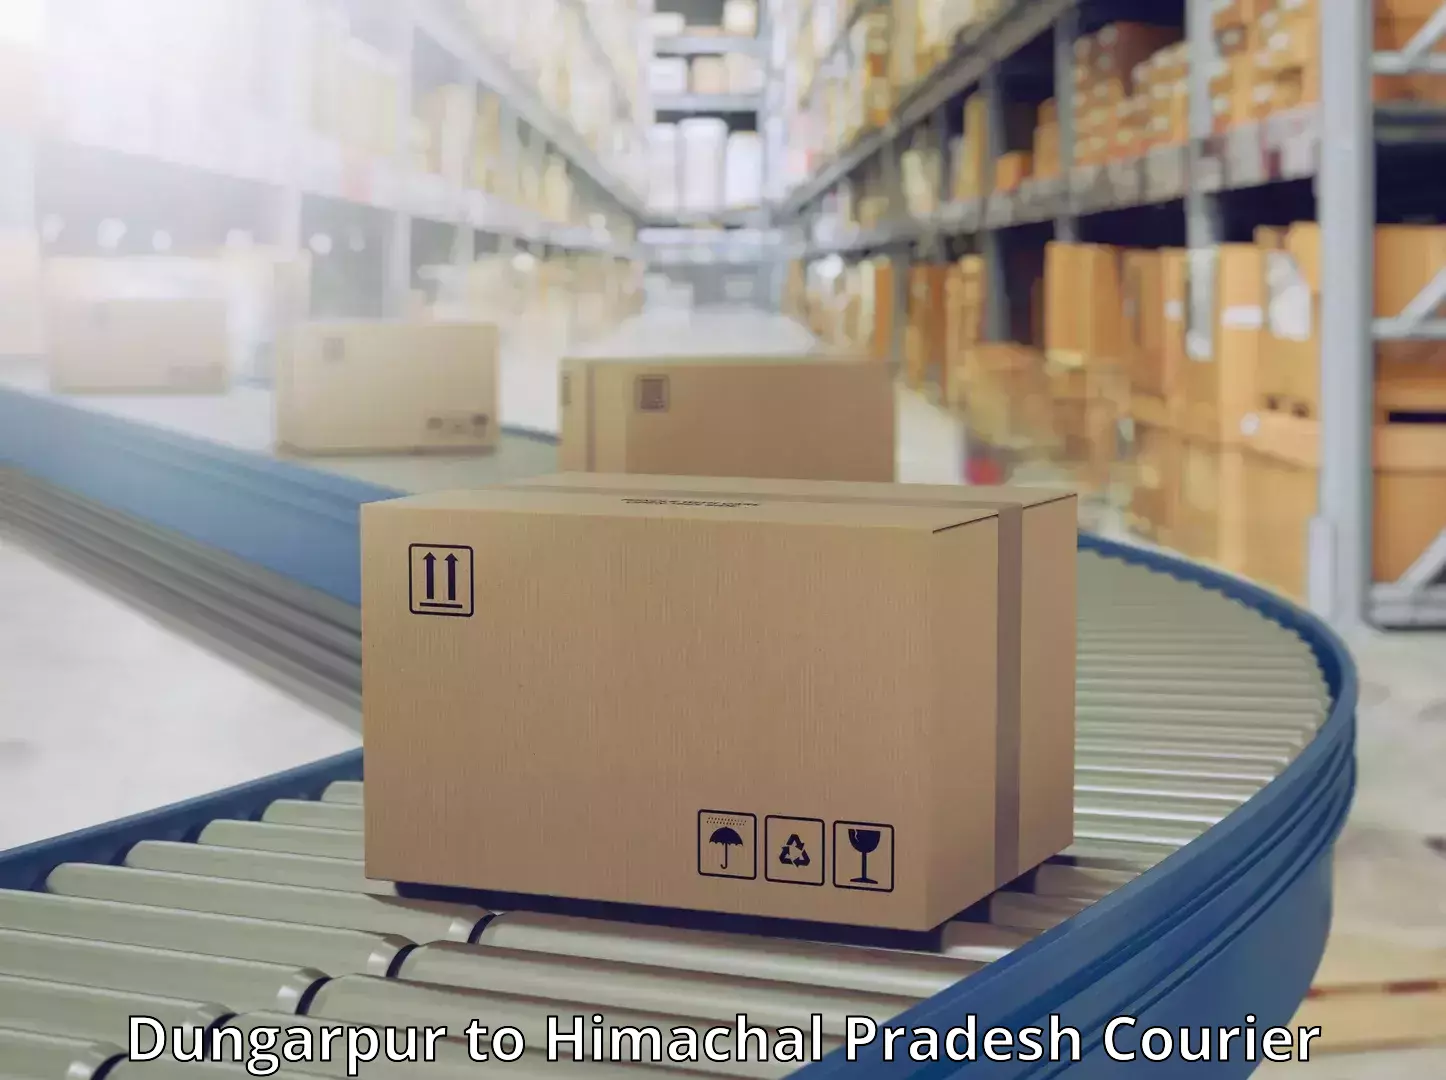 Supply chain delivery in Dungarpur to Bilaspur Himachal Pradesh